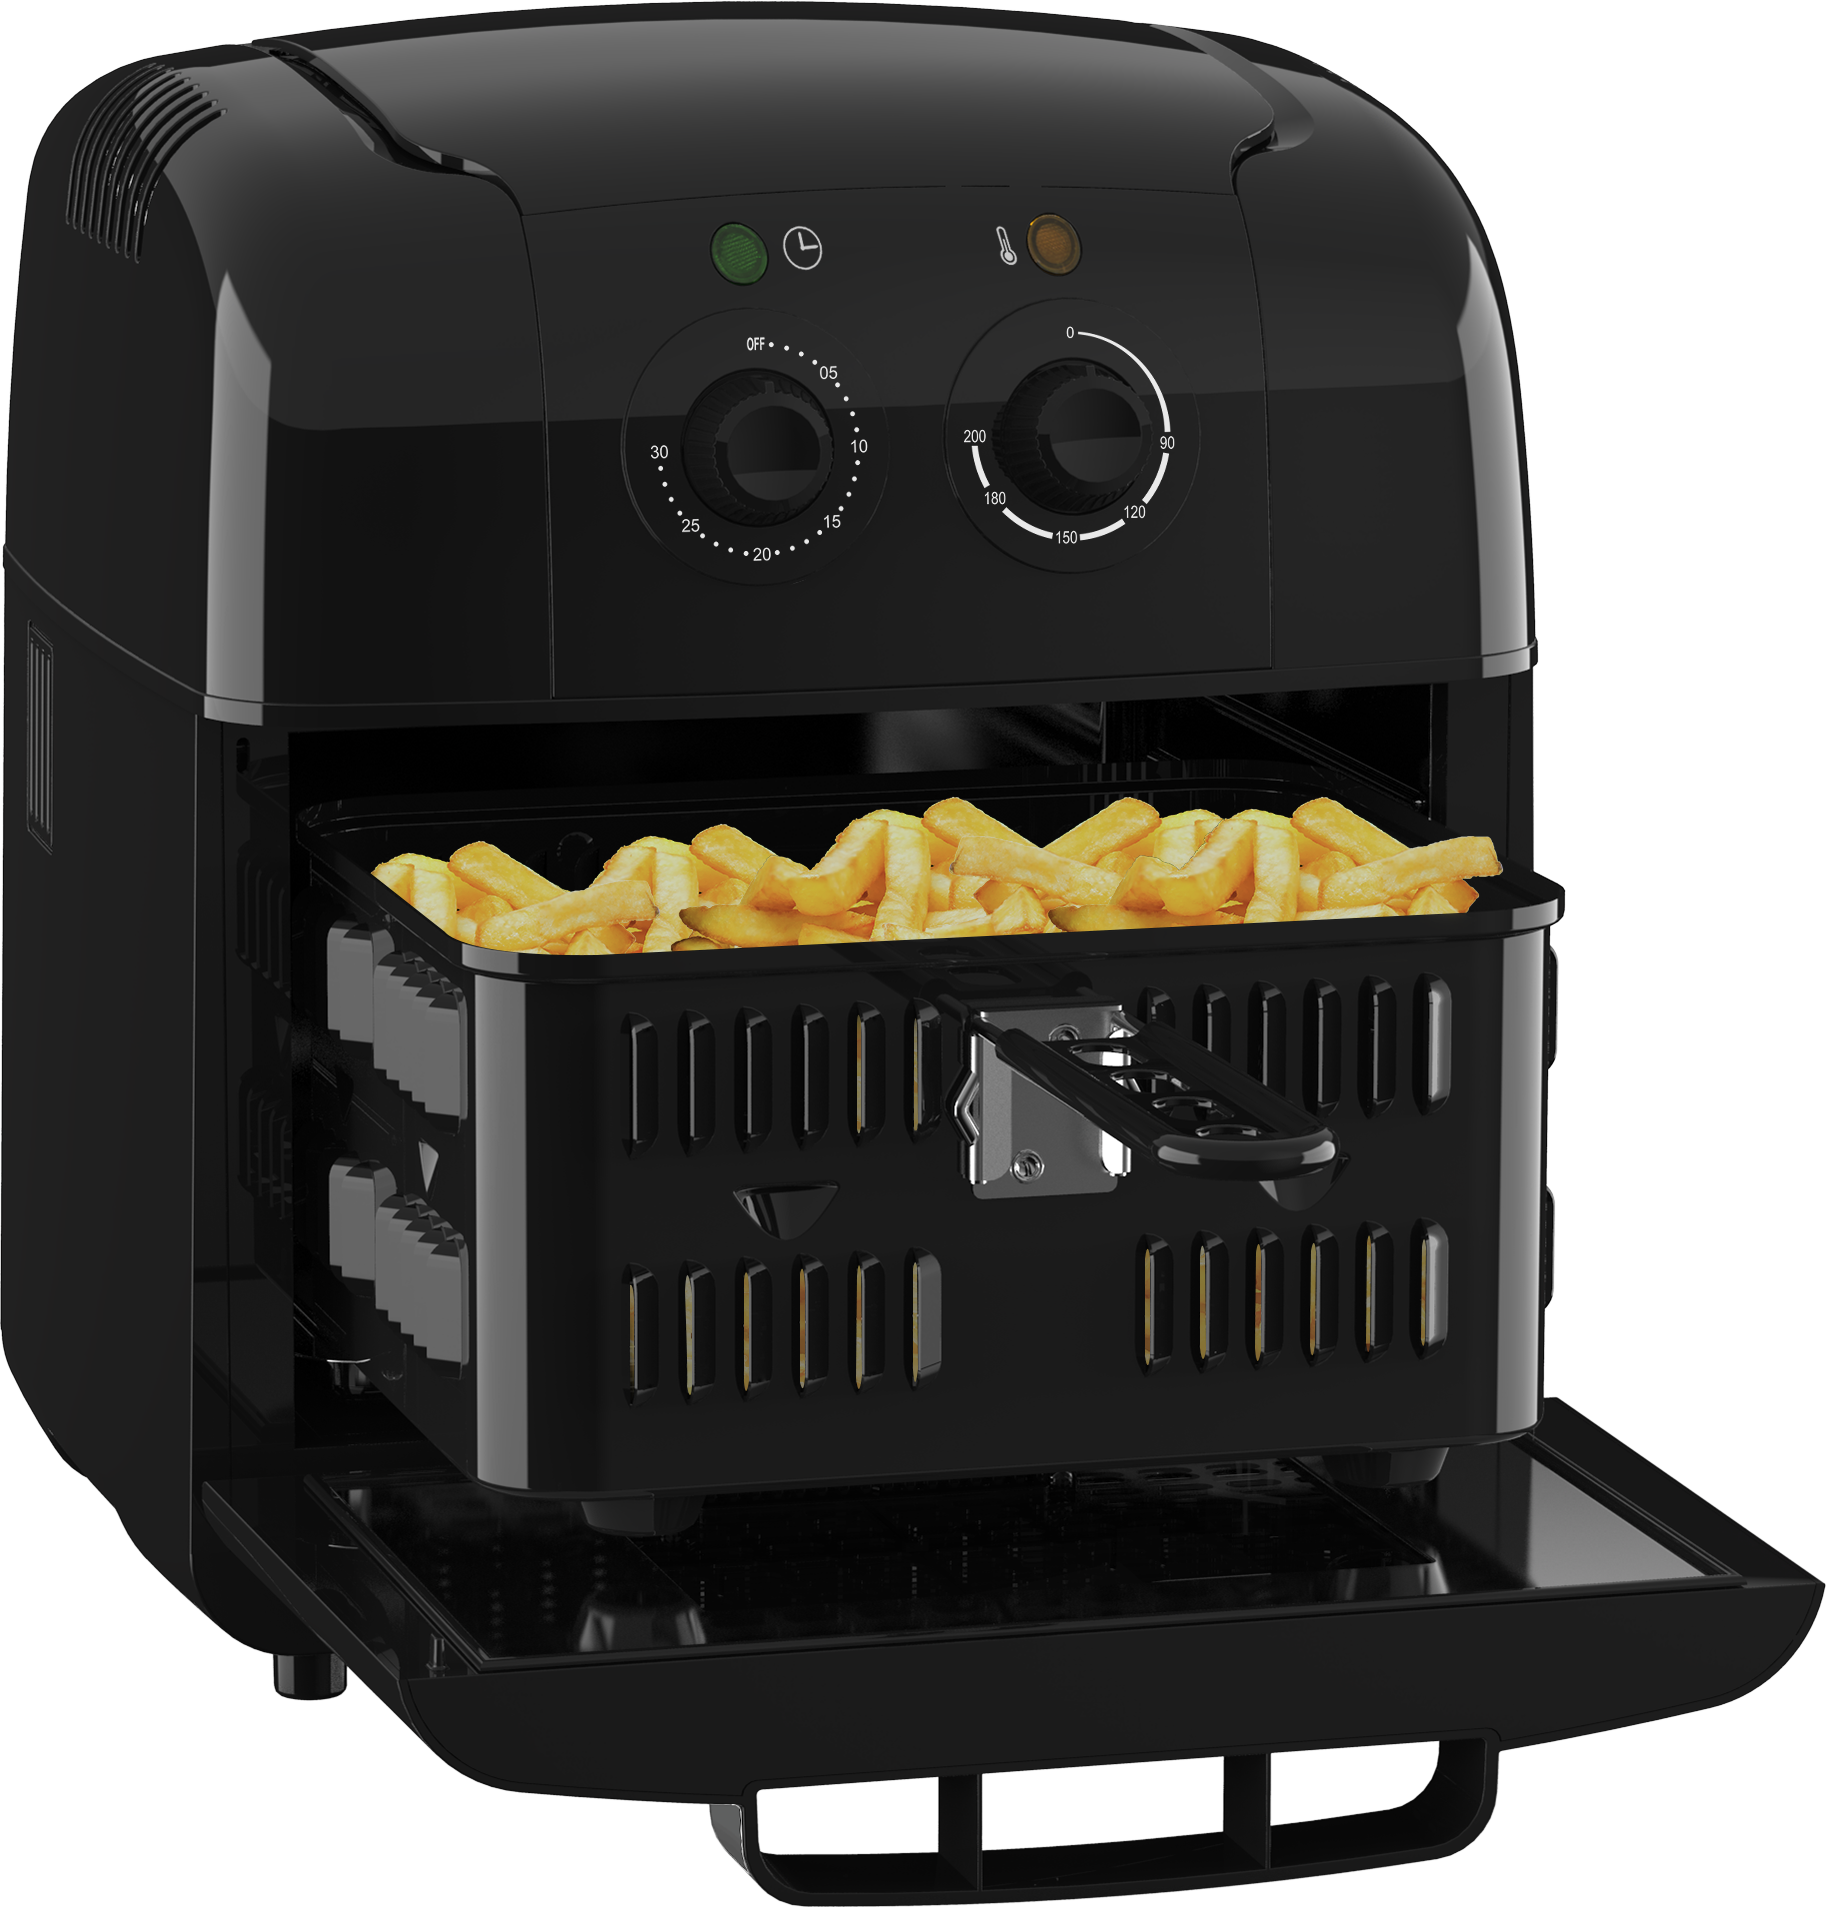 1600W electric air fryer oilless cooker,non-stick coating,air oven,auto shut-off function